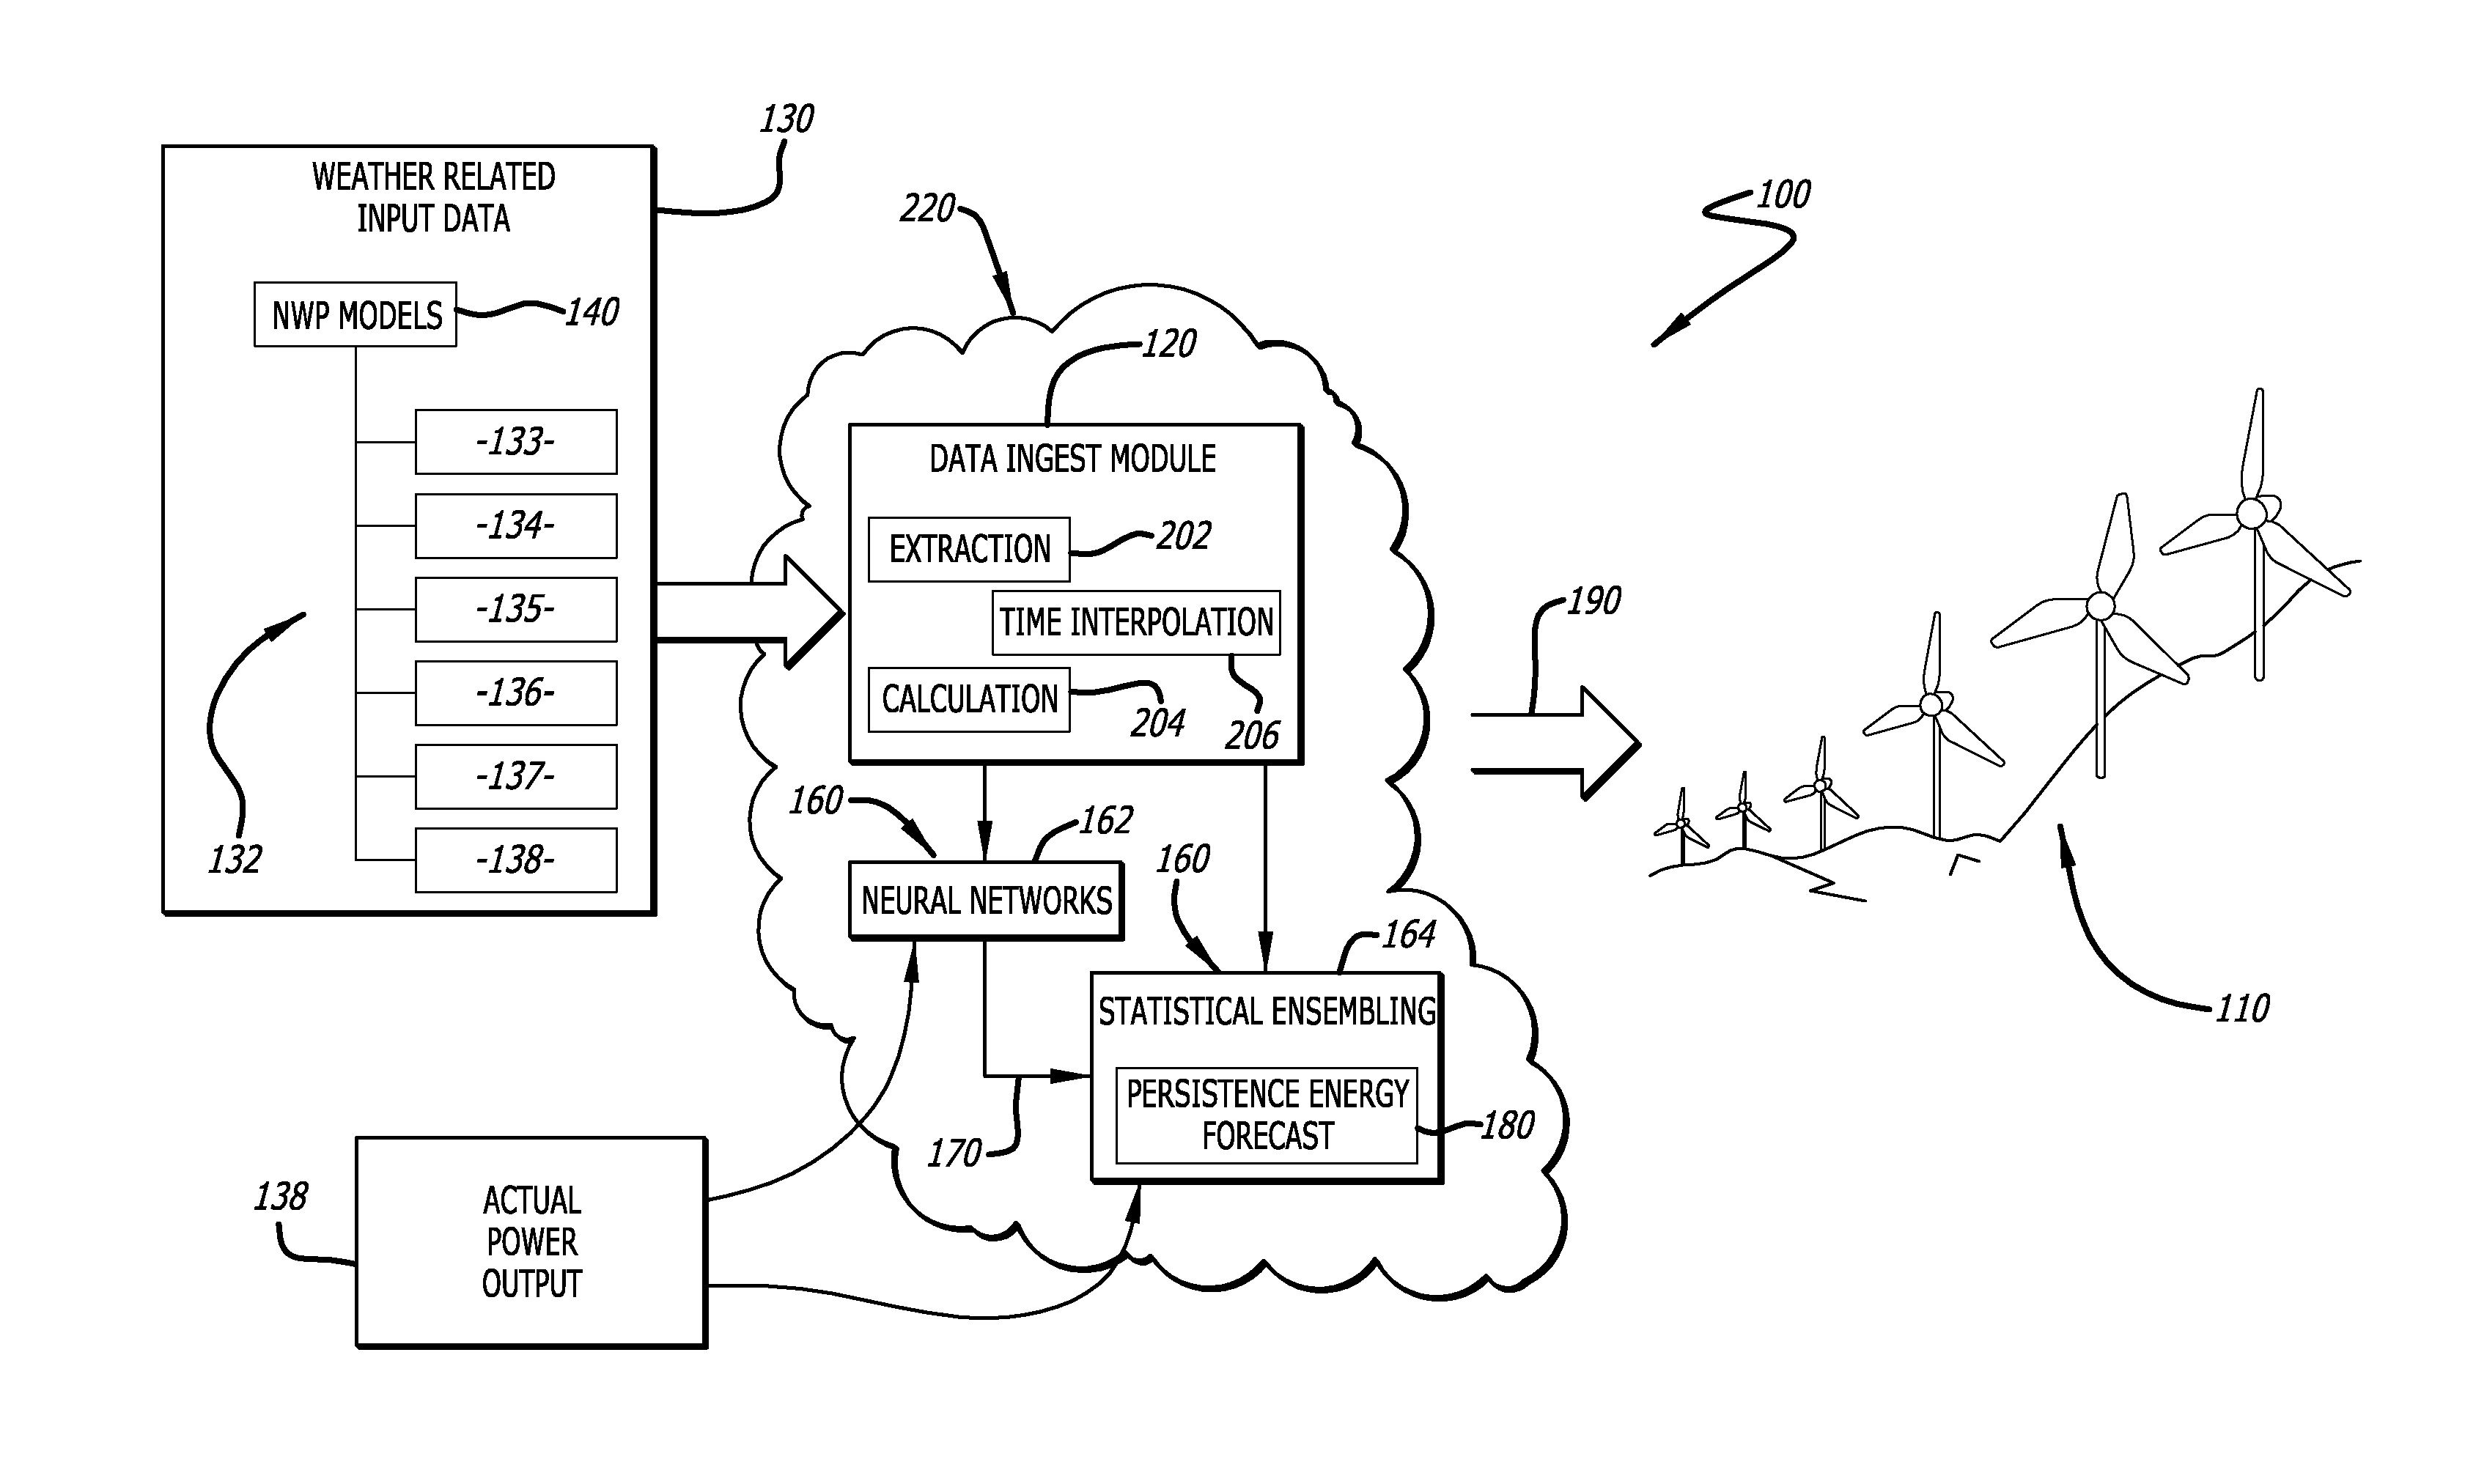 Application of artificial intelligence techniques and statistical ensembling to forecast power output of a wind energy facility